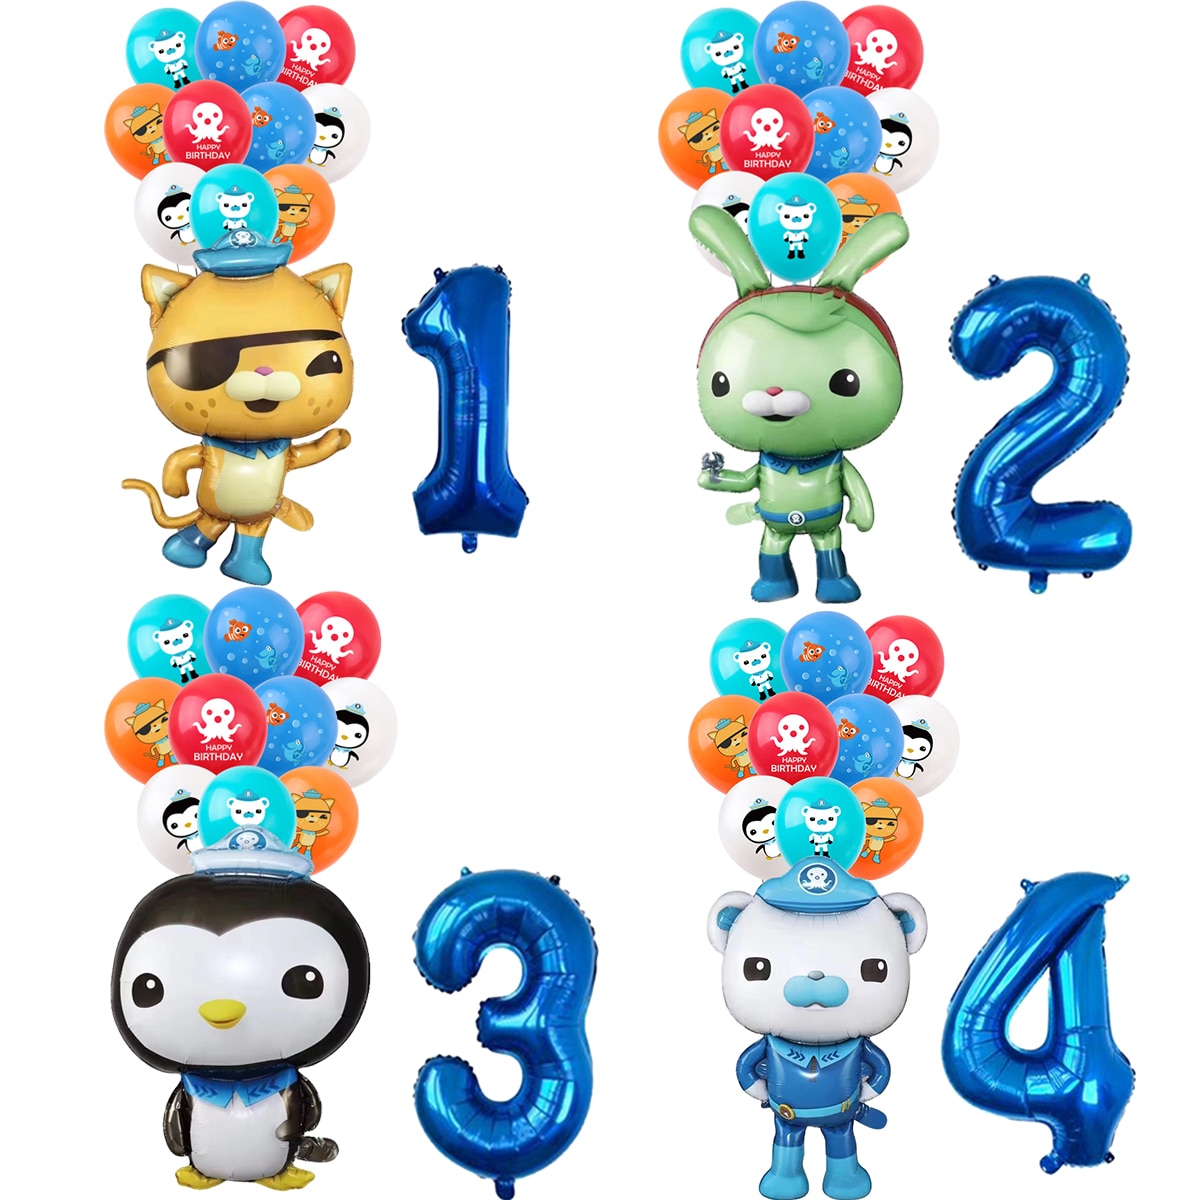 12pcs The Octonauts Them Foil Balloons Boys Girls Birthday Party Decorations 32inch Number Globos Baby Shower Decor Supplies